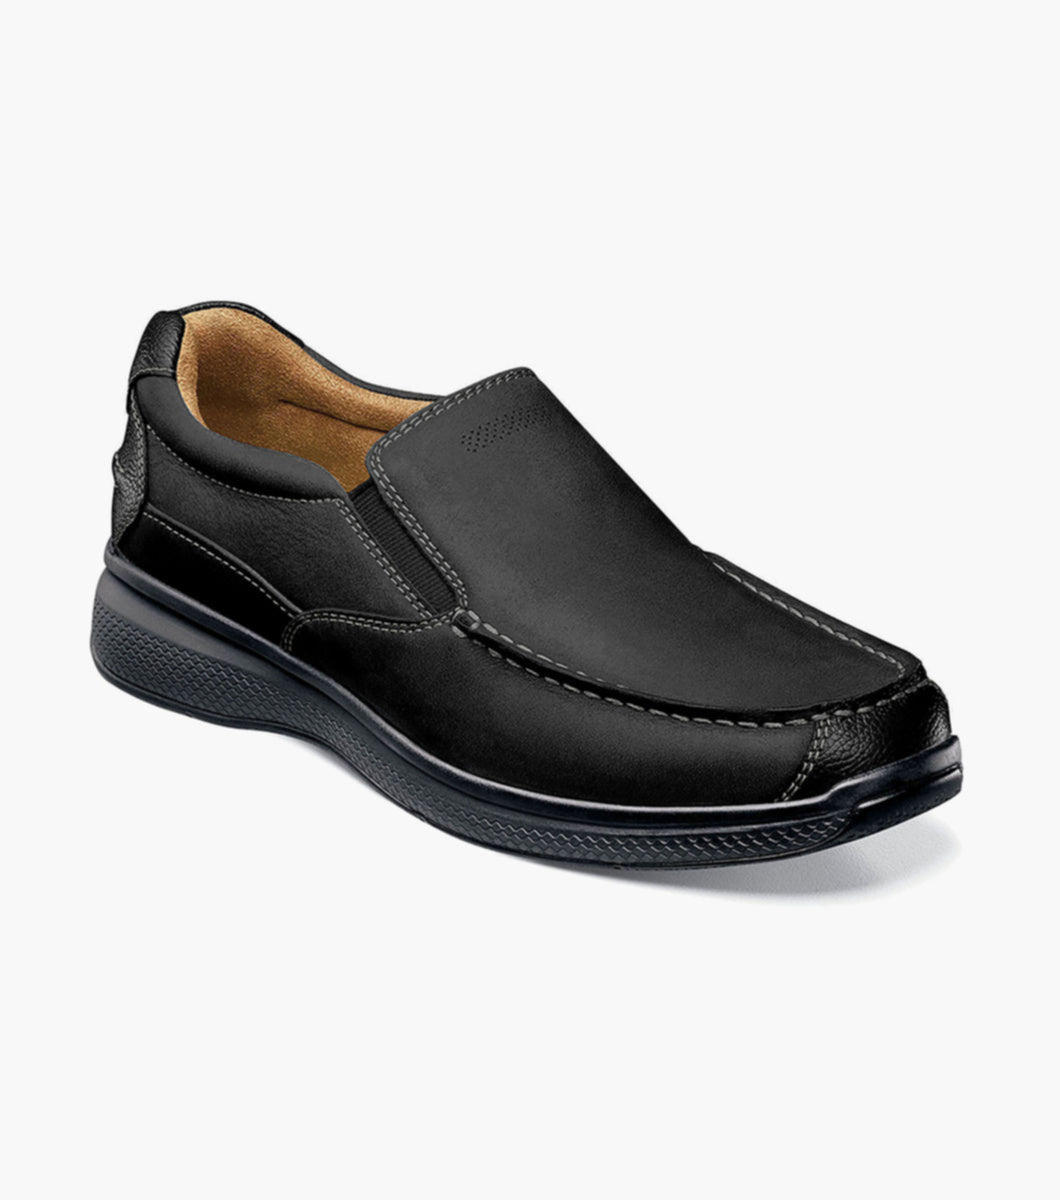 The Great Lakes region of the U.S. is known for its uncommon beauty. Our Great Lakes collection captures that spirit with stylish shoes that share a casual appeal, modern silhouette, on-trend soles, and the latest in barefoot comfort technology. The Florsheim Great Lakes Moc Toe Slip On features a venetian-style vamp and the added comfort of a dual gore enclosure.